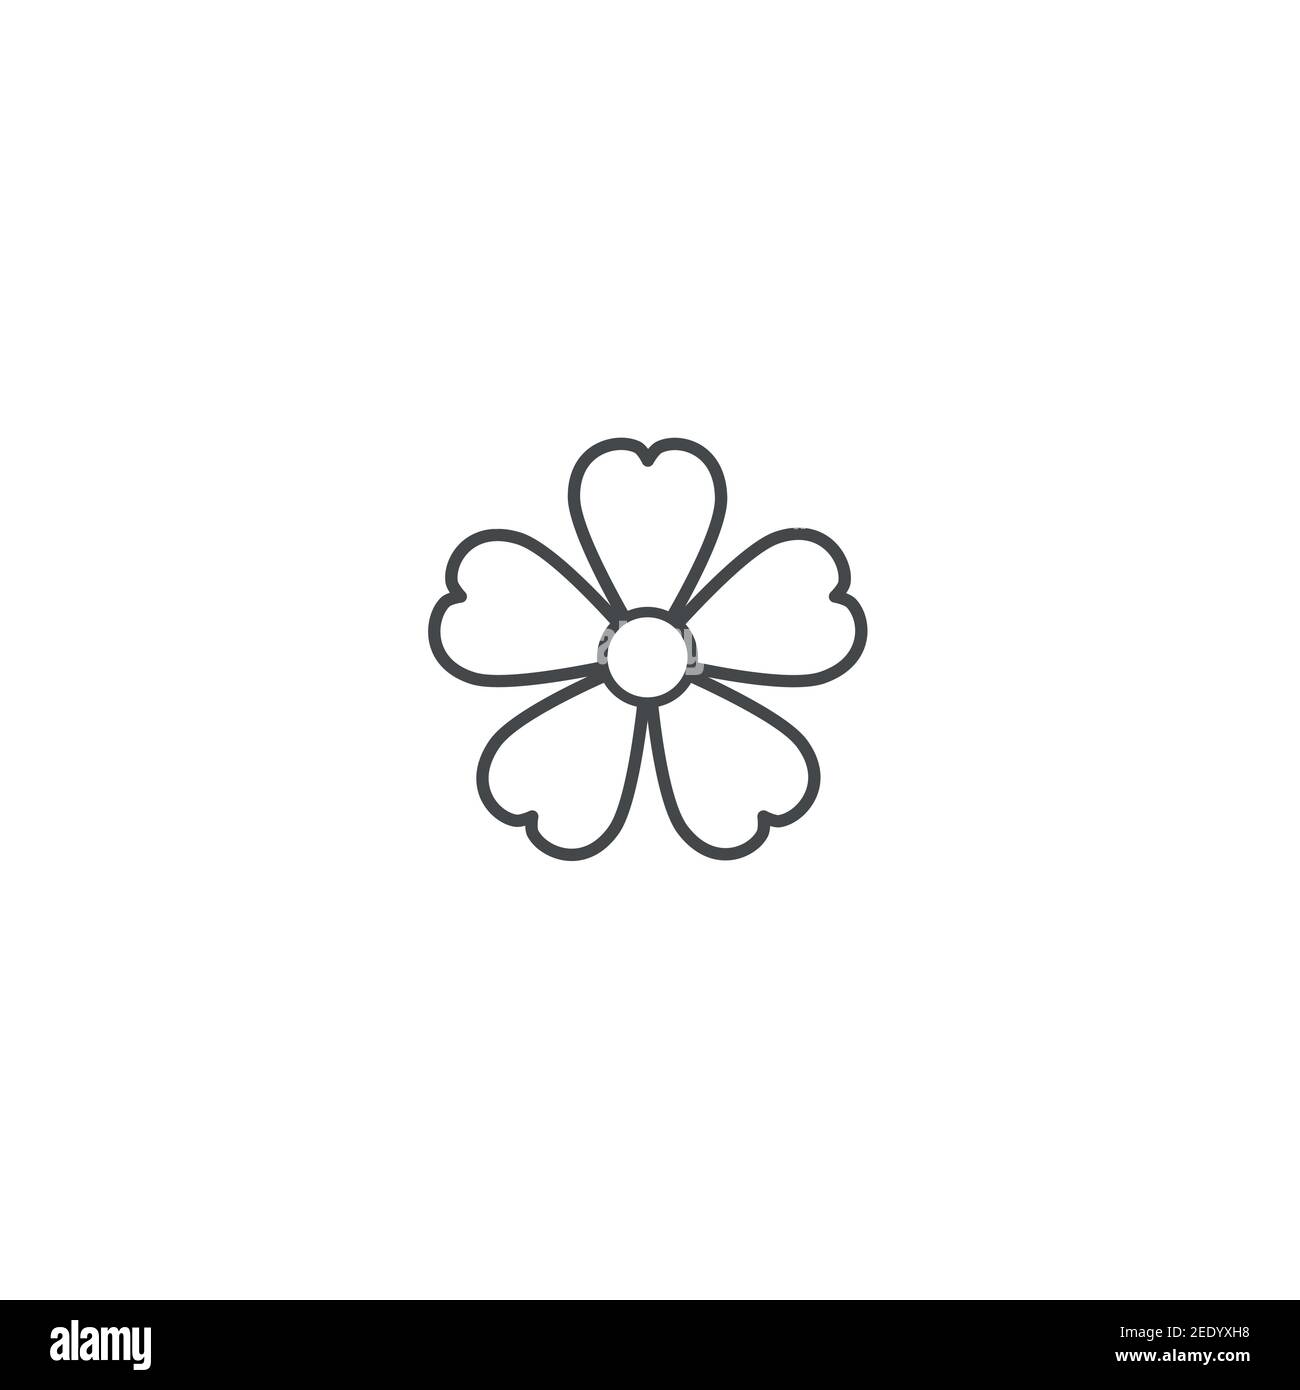 Outline flat icon of forget-me-not flower with big core. Contour ...